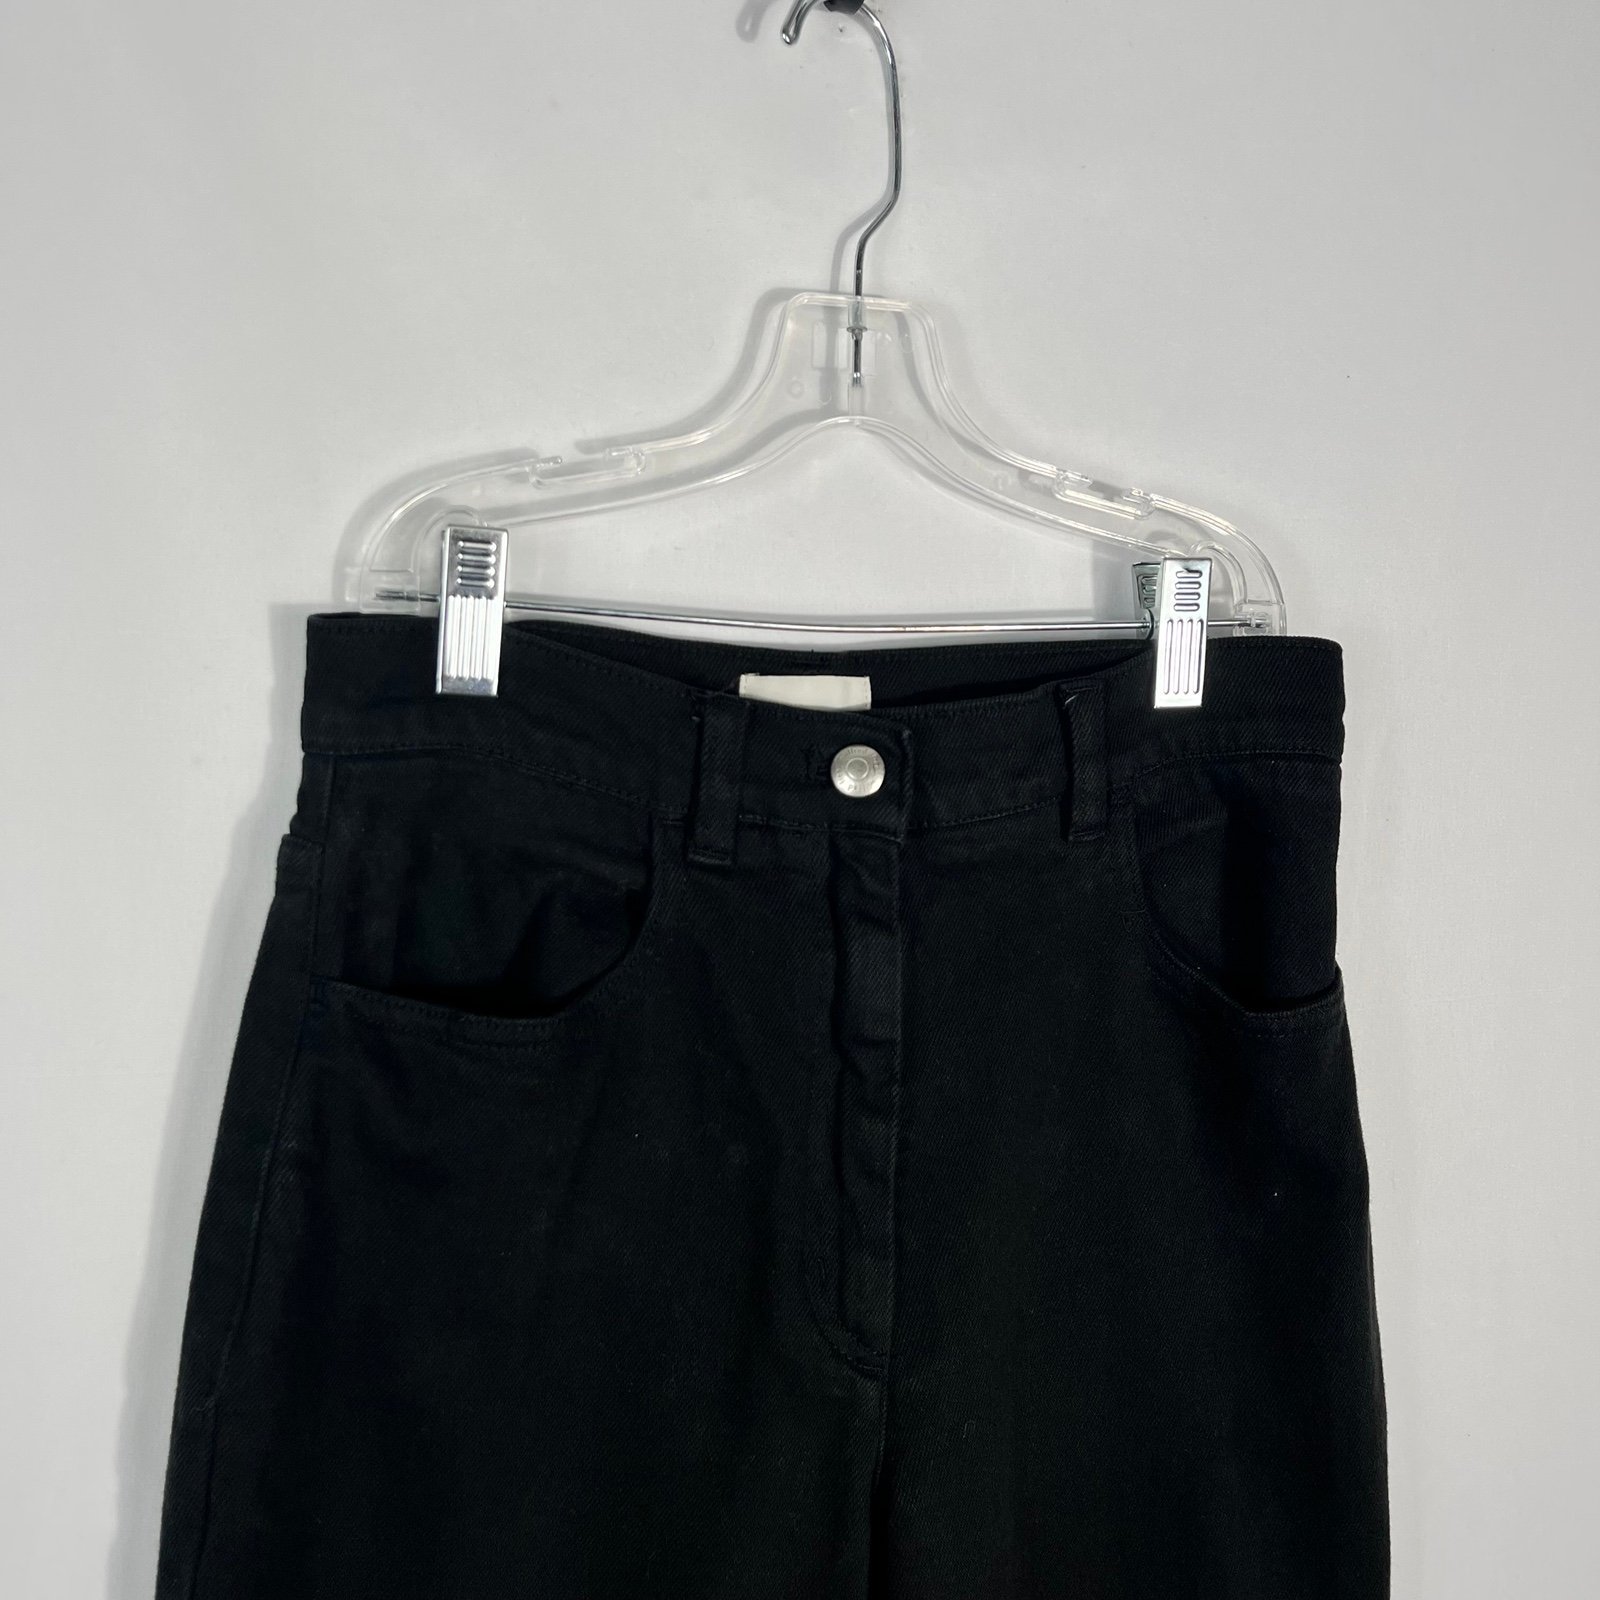 Stylish Wilfred Free Black High Rise Waisted Tapered Leg Rigid Denim Jeans Size 2 Casual pIqN6A1fm well sale